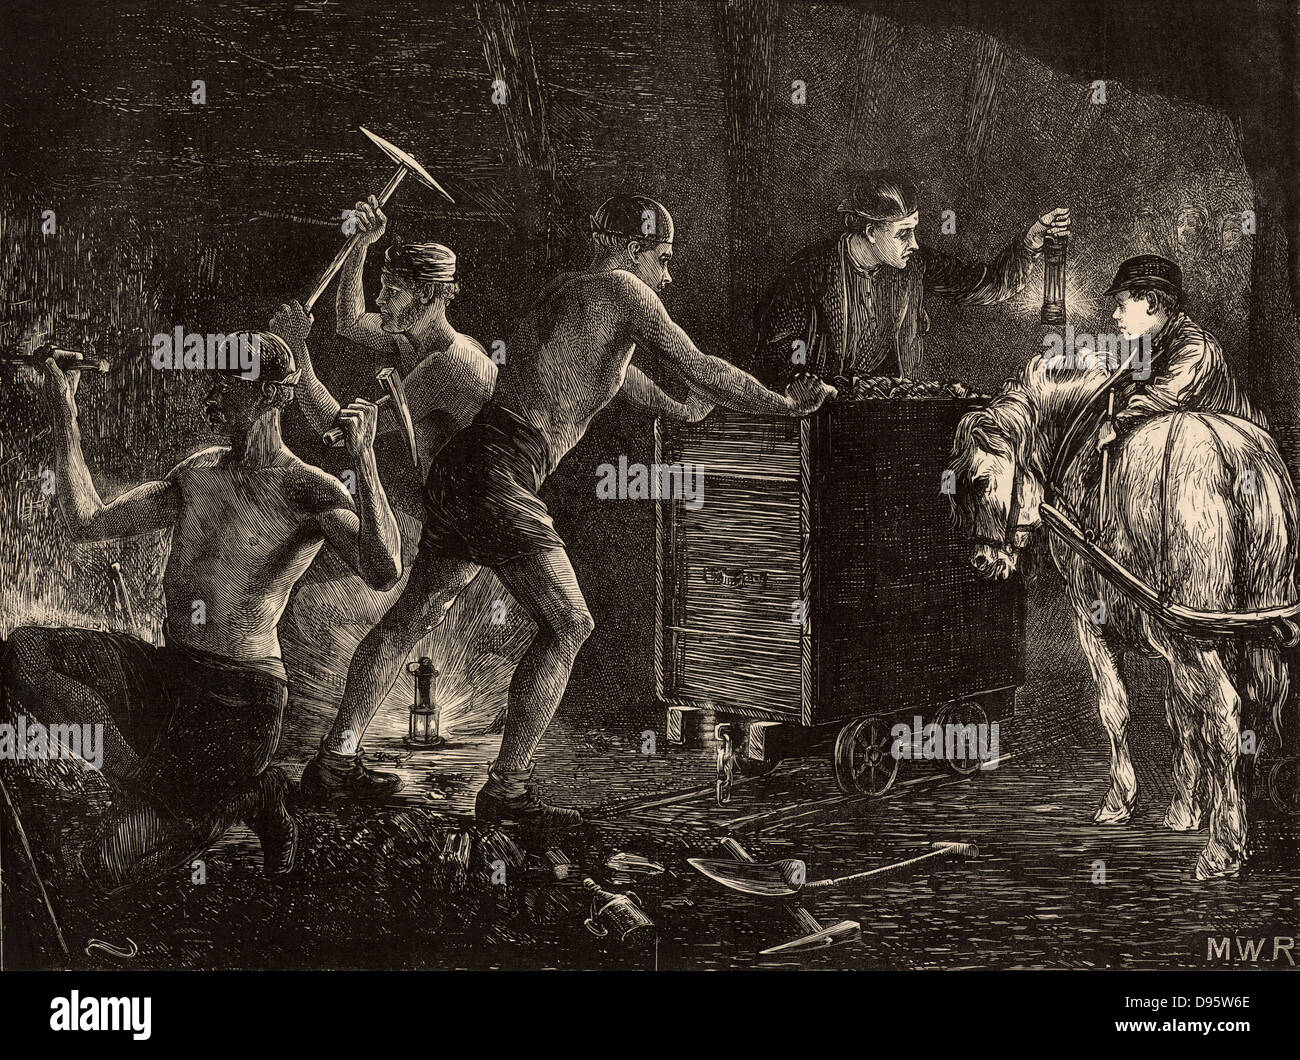 South Durham miners or pit-men at work at the coal face. On the floor, centre left, is a Clanny safety lamp which had a thick glass round the flame, while on the right the miner is holding up a Davy lamp which had wire gauze round the flame. On the right the boy with a pit pony is waiting for the miners to fill the wagon with coal so that he can hitch up the pony which will drag the wagon along the rails to the bottom of the pit shaft. Engraving from 'The Graphic' (London, 28 January 1871). Stock Photo